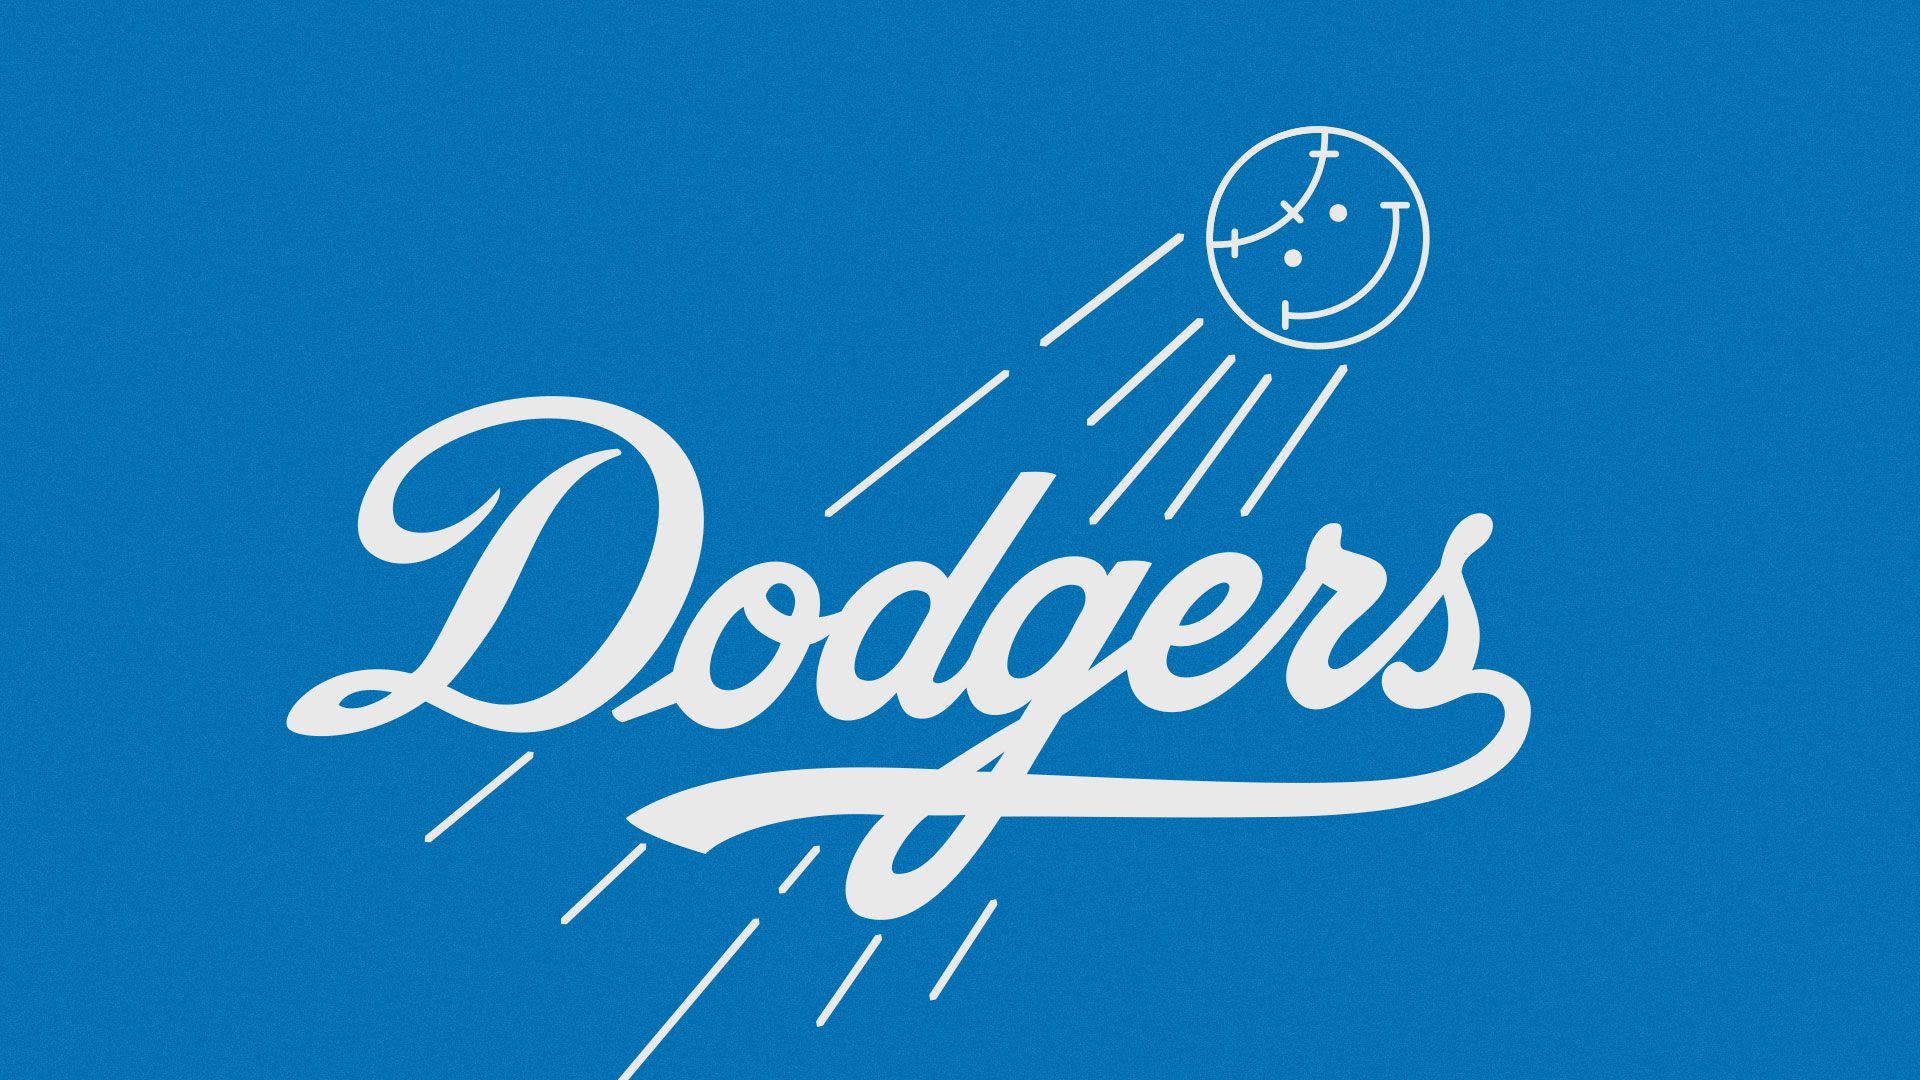 The Dodgers' Southern California television blackout has ended